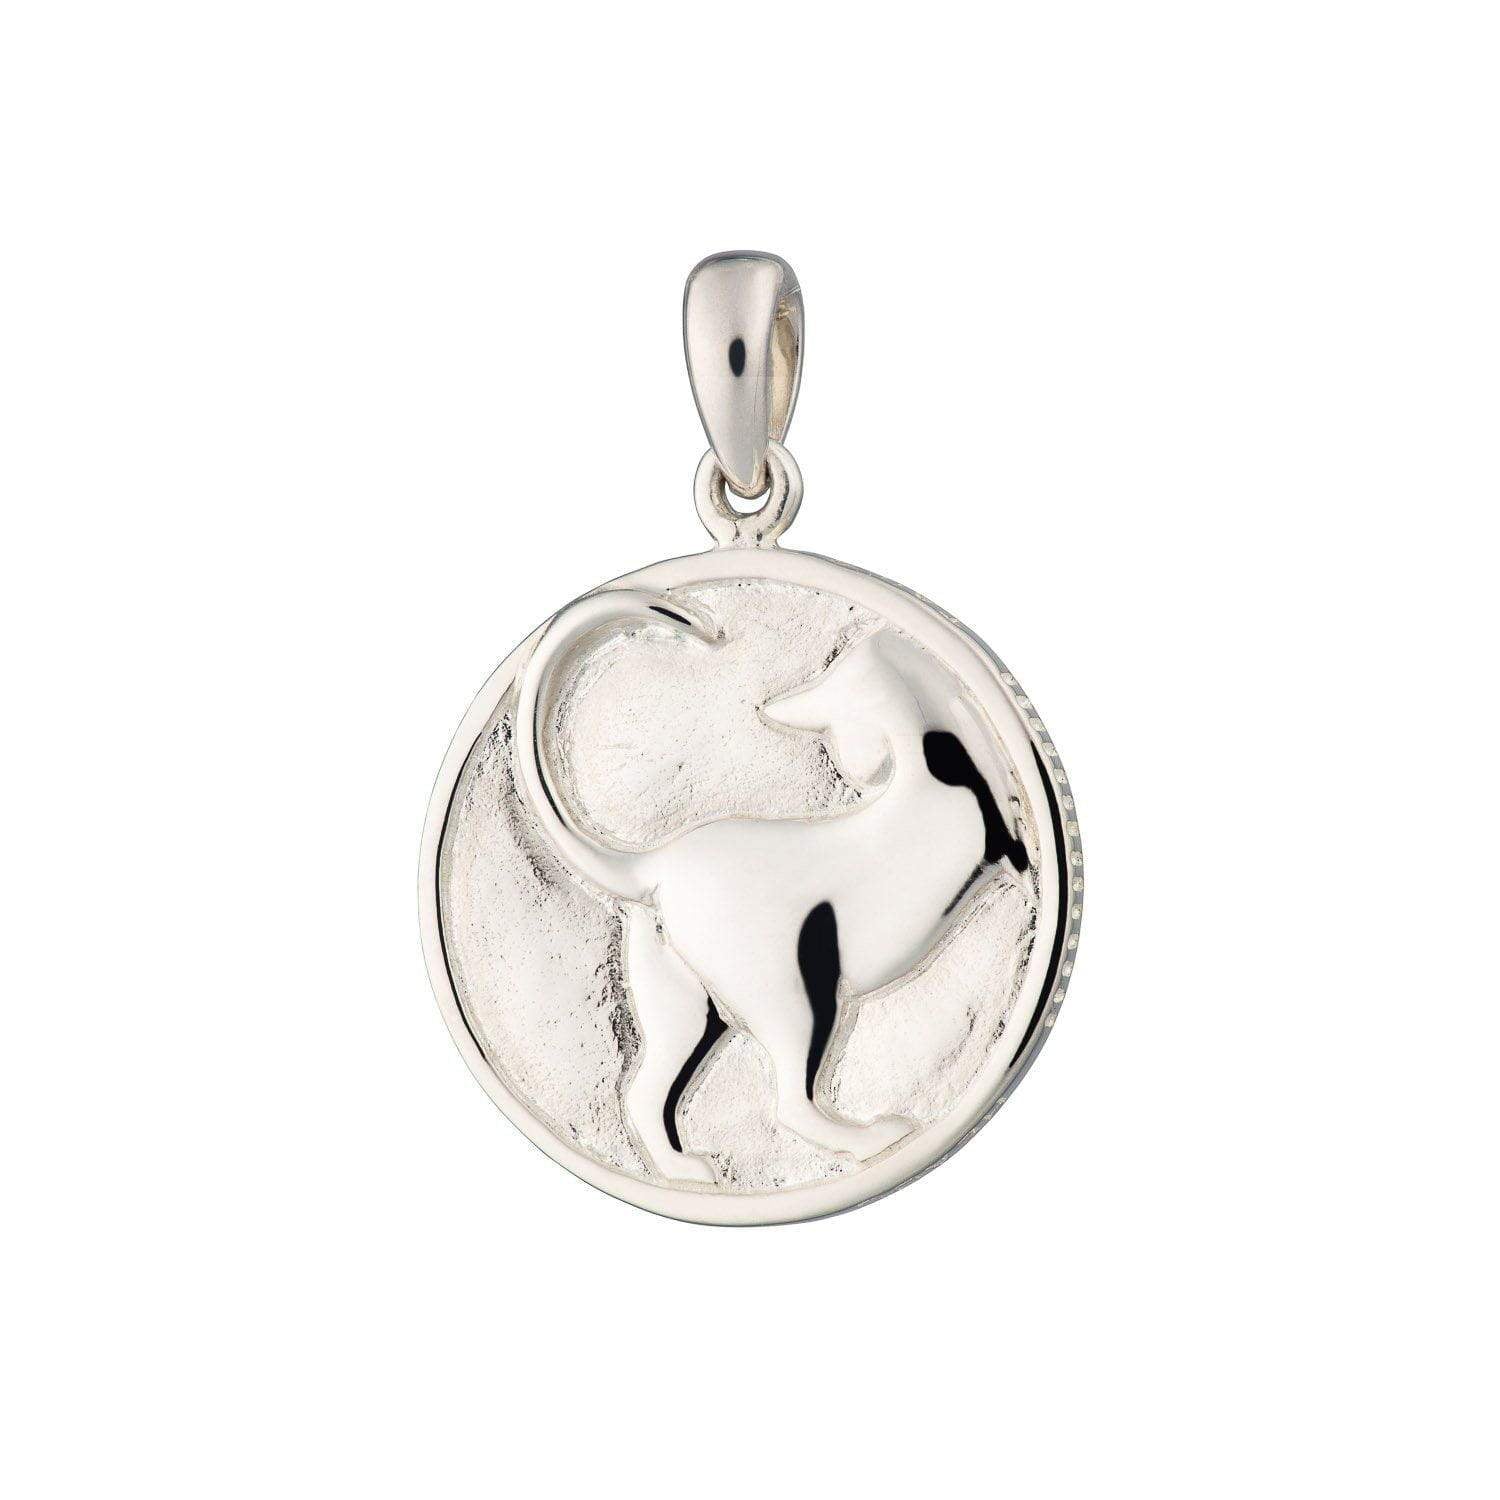  Cat Heads and Tails Charm - by Scream Pretty